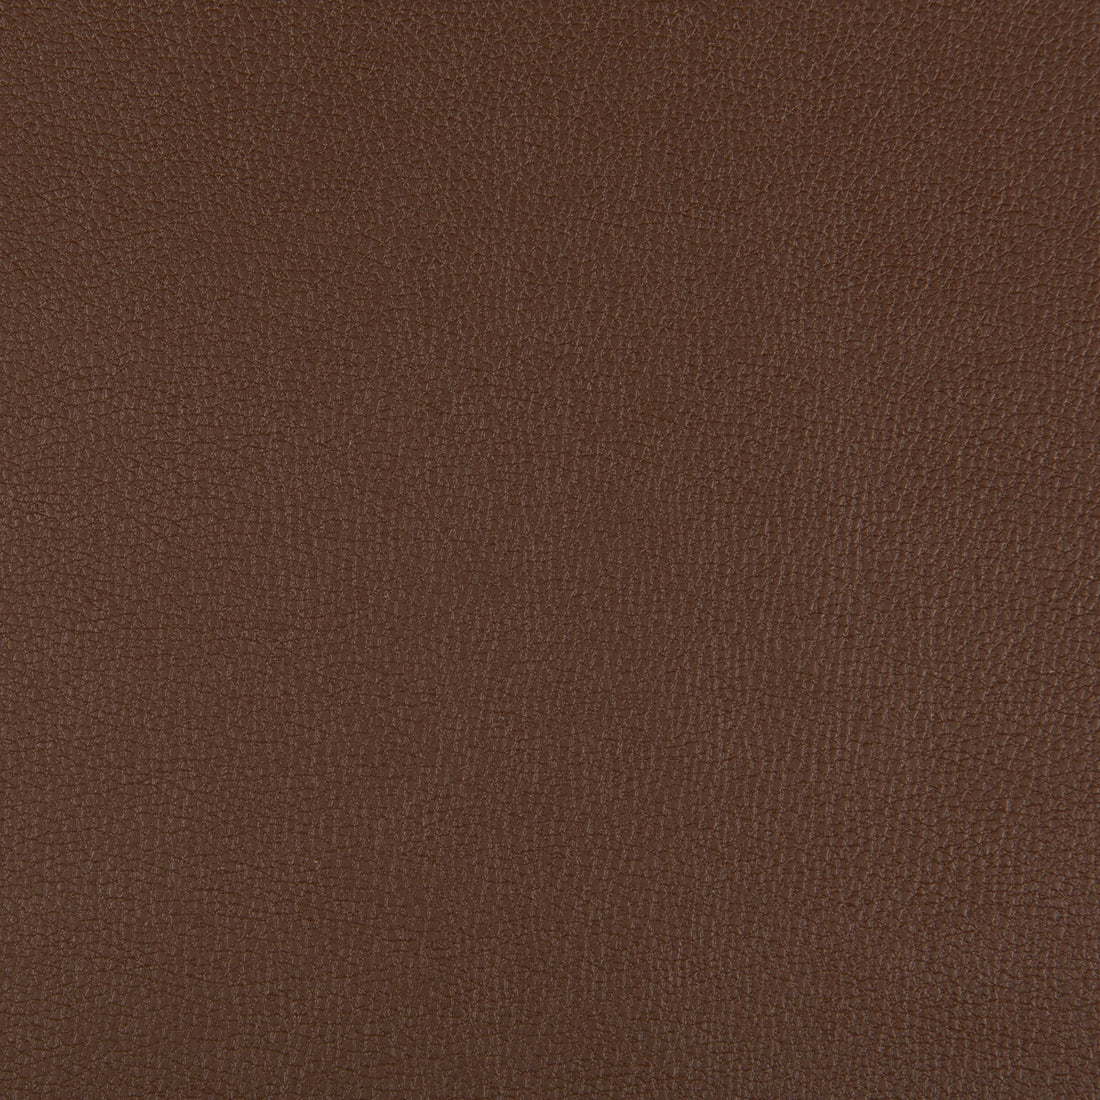 Syrus fabric in chocolate color - pattern SYRUS.6.0 - by Kravet Contract